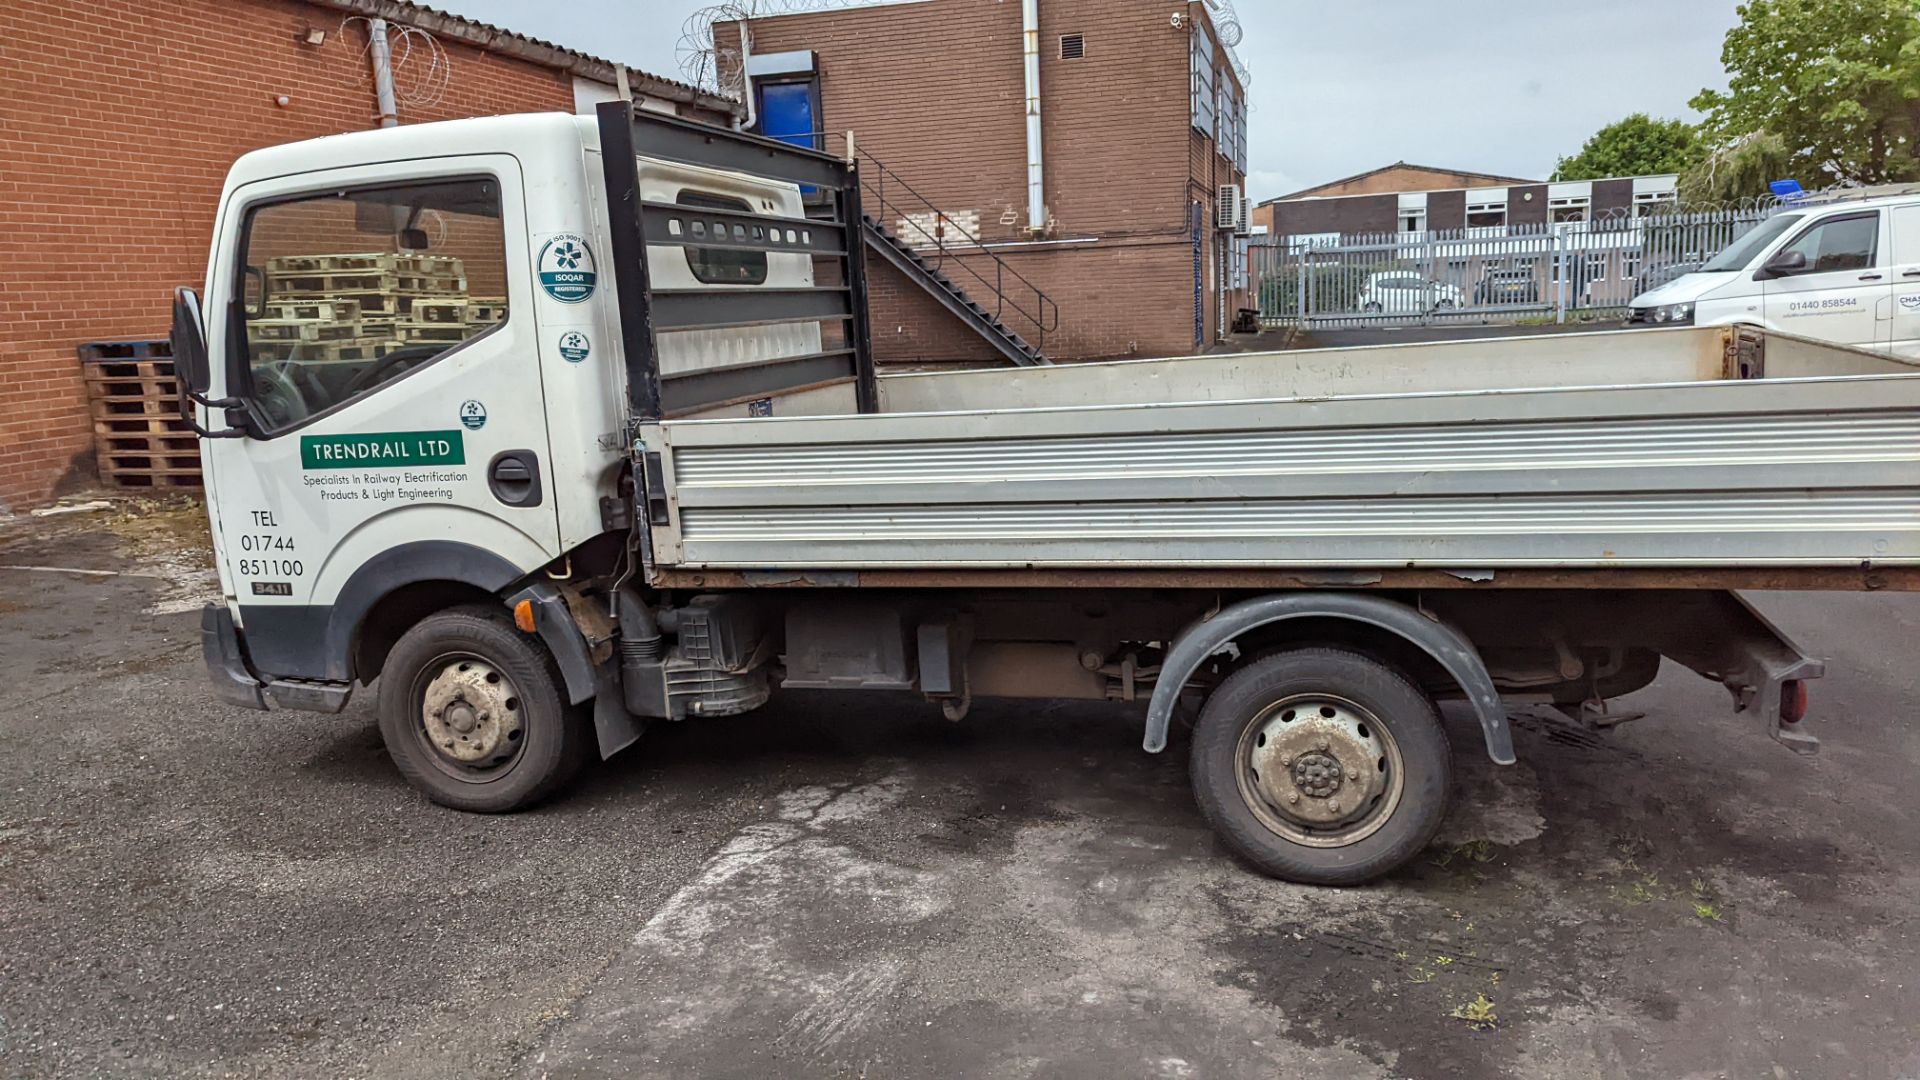 FE57 UVK Nissan Cabstar 34.11 S/C SWB 3.1m dropside, 5 speed manual gearbox, 2488cc diesel engine. - Image 12 of 35